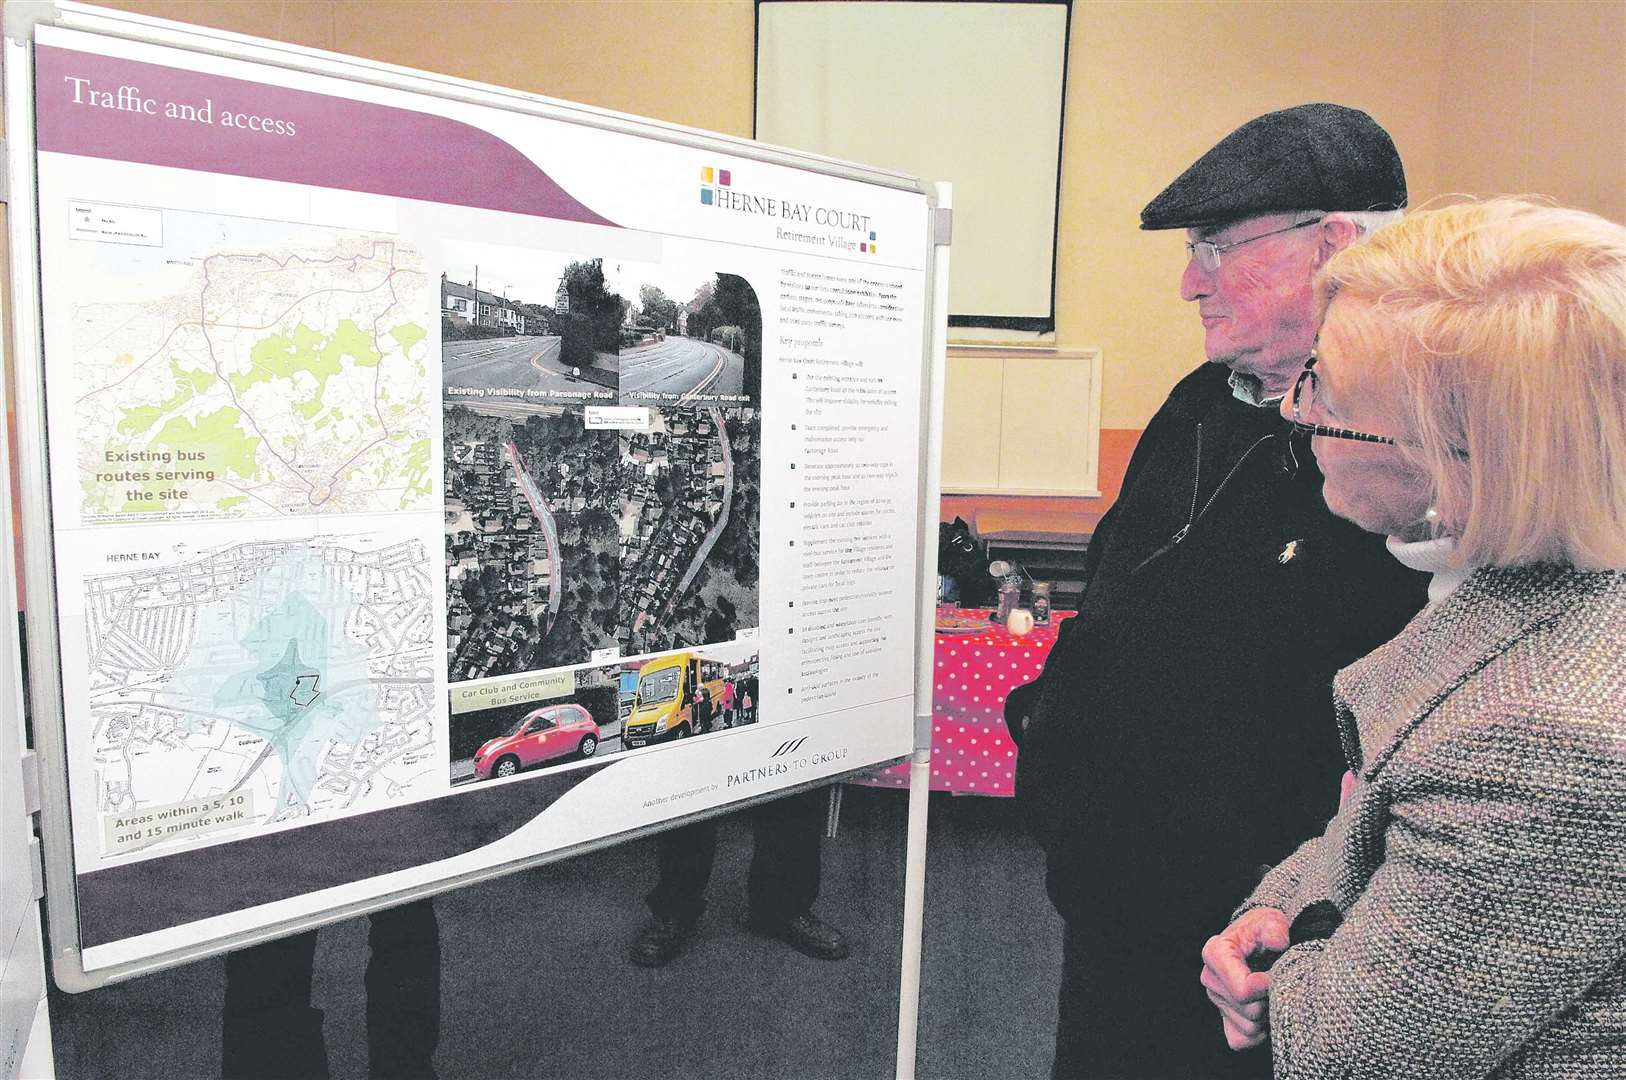 Residents at the exhibition of plans and impressions of Herne Bay Court in 2012. Picture: Chris Davey